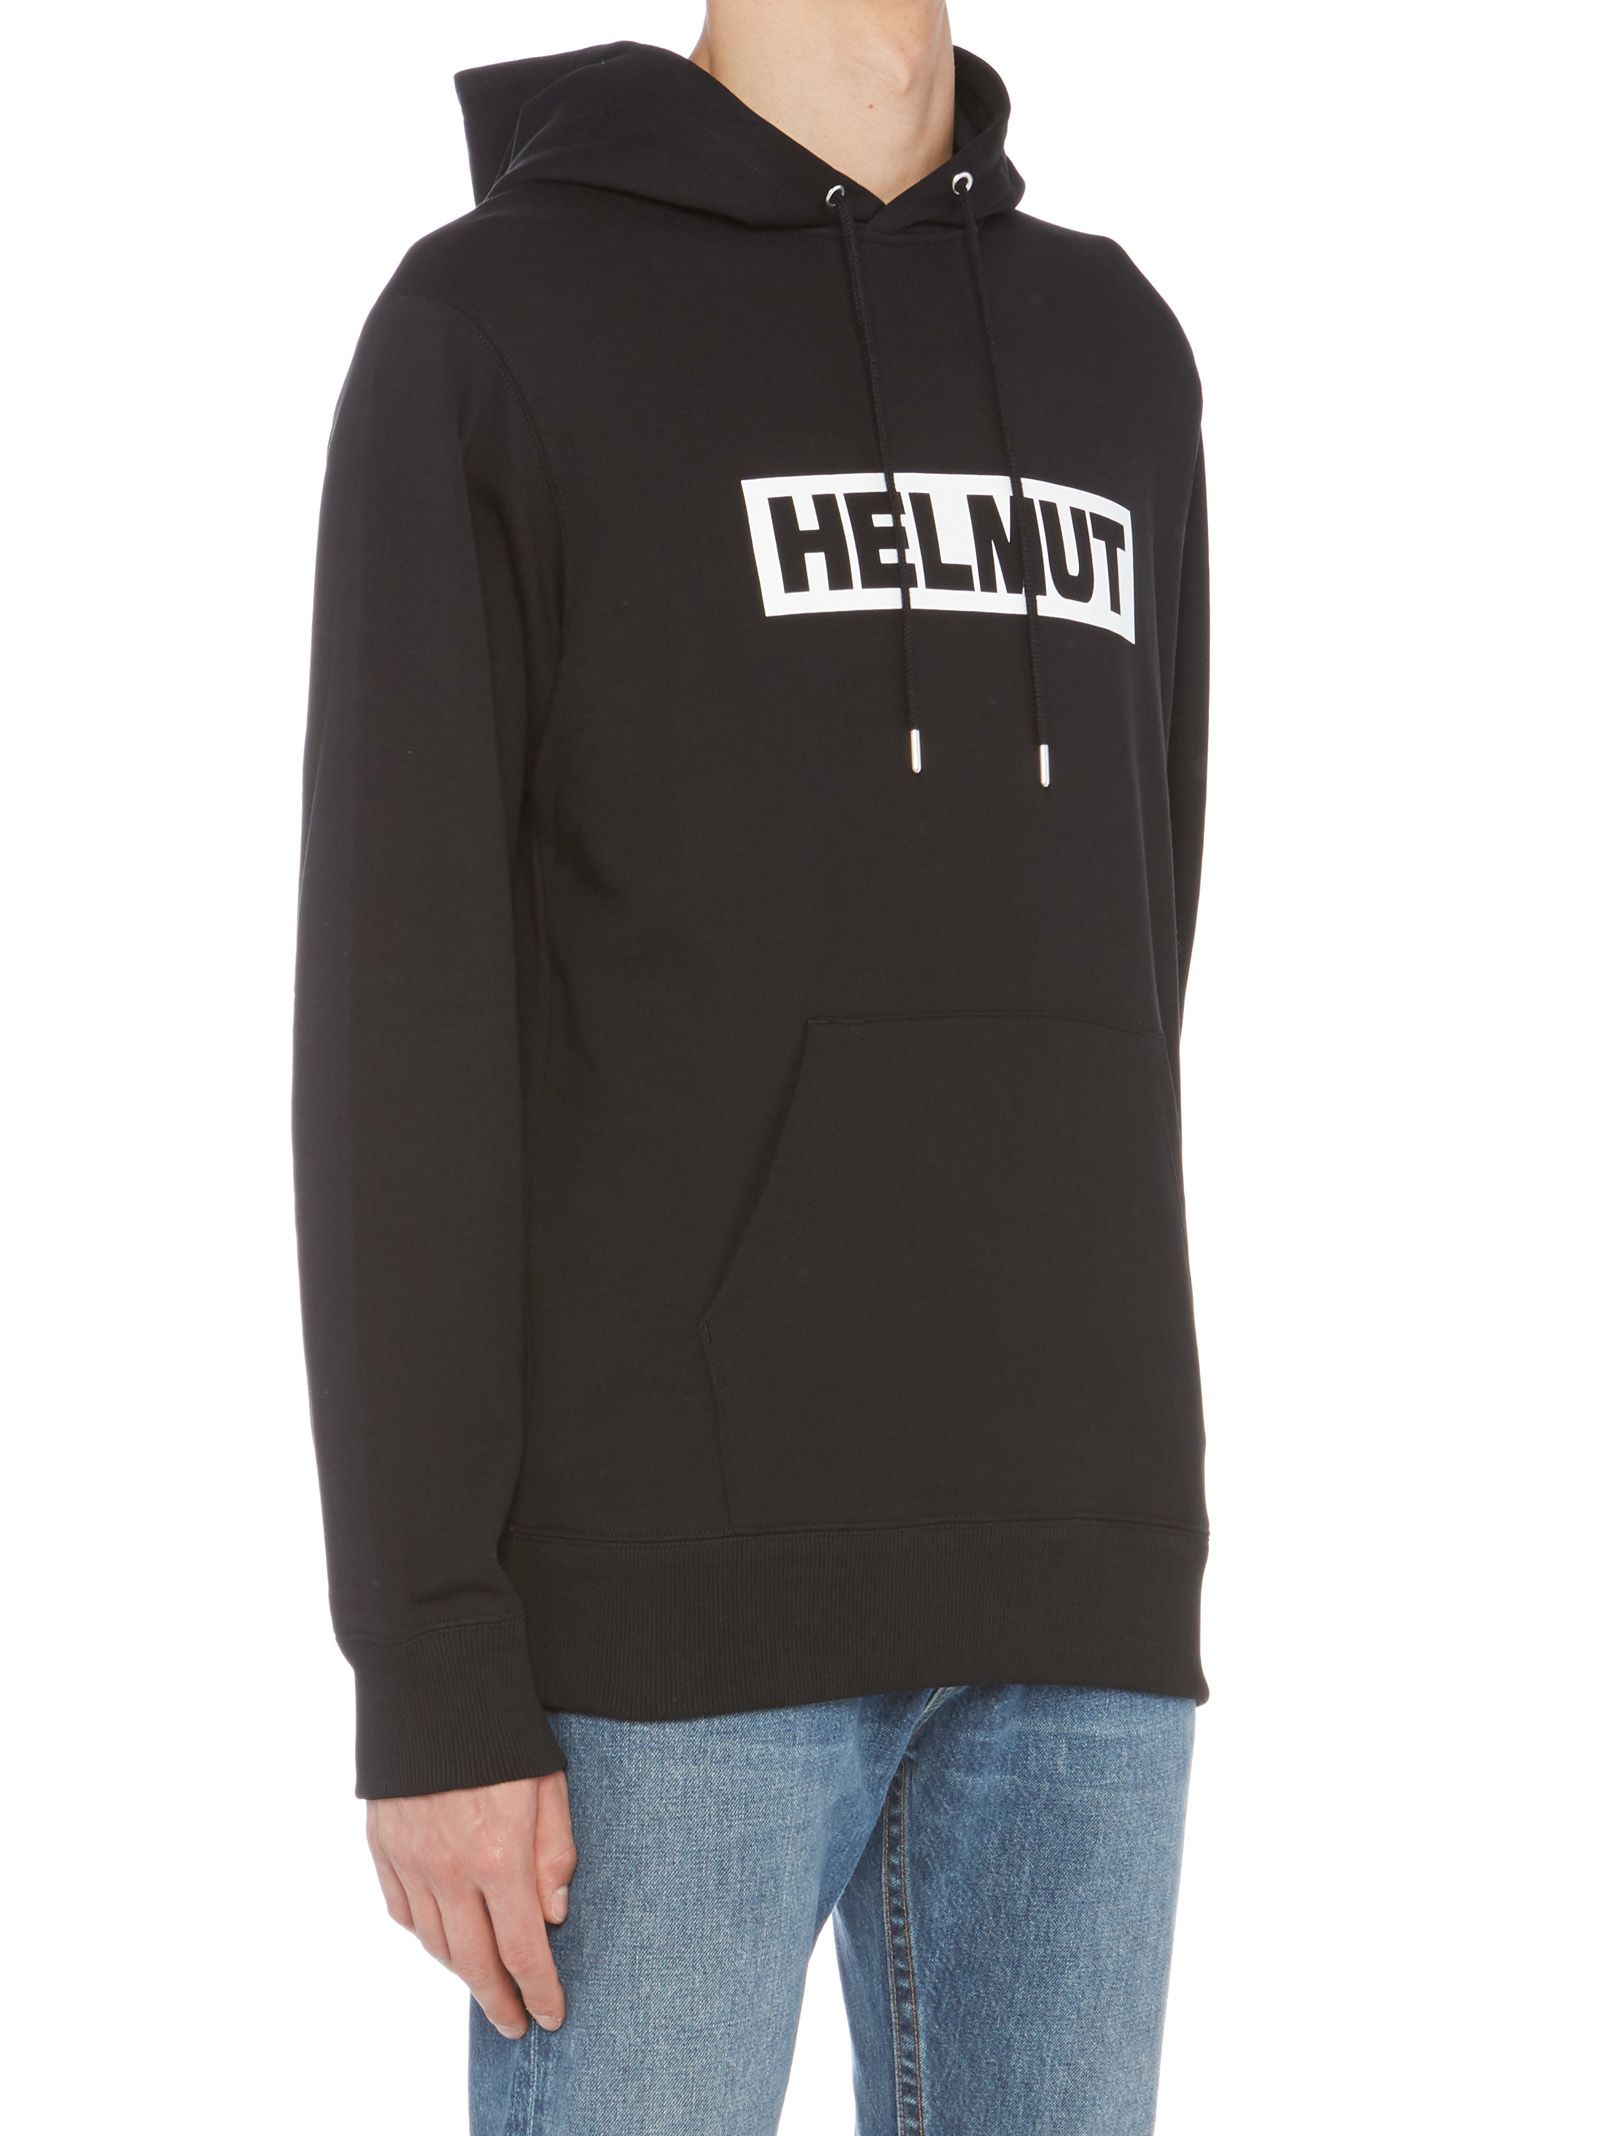 italist | Best price in the market for Helmut Lang Helmut Lang Hoodie ...